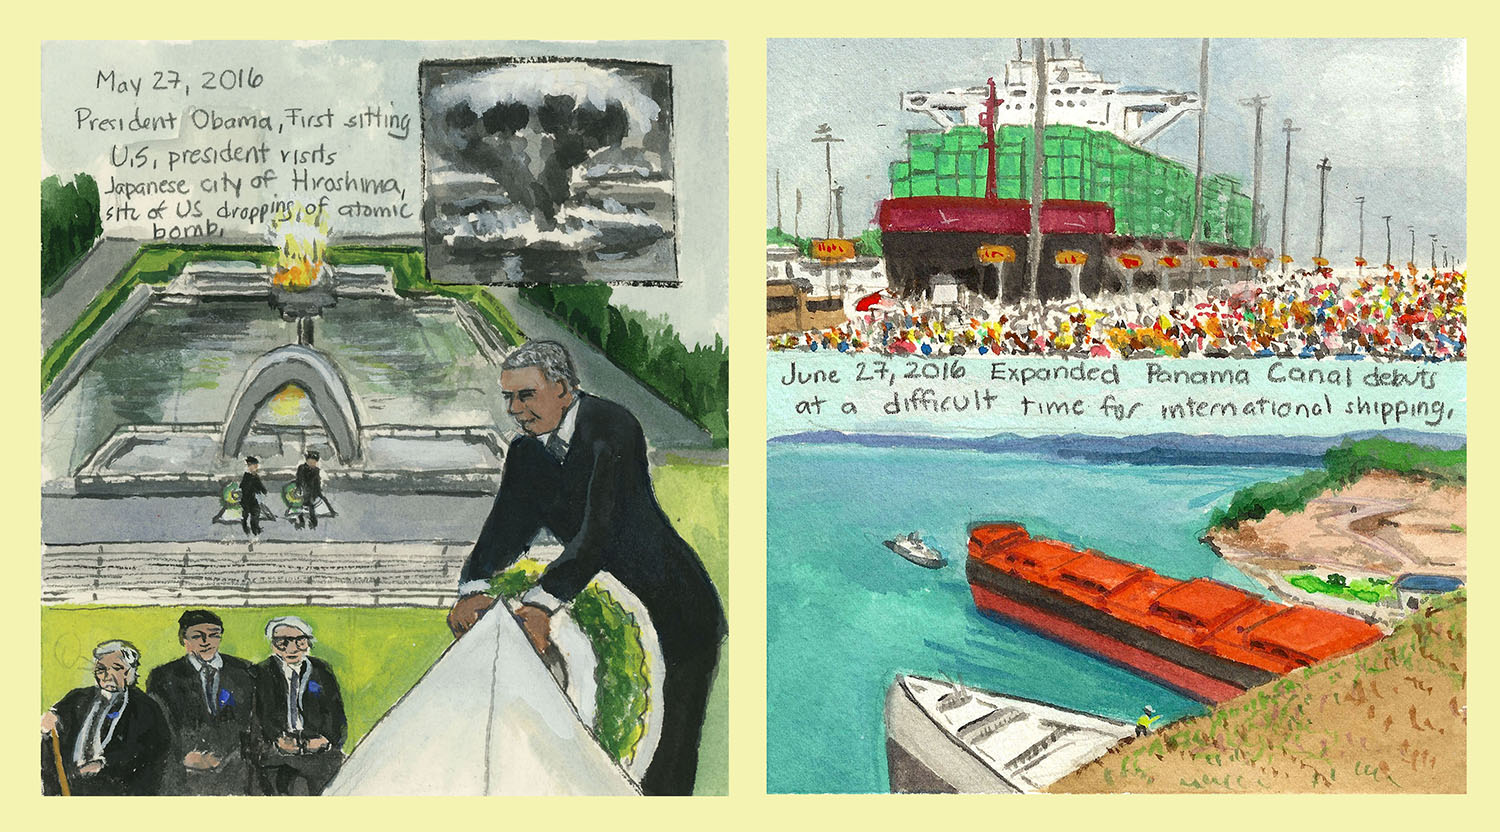 (LEFT): Day 188 (May 27, 2016). Watercolor, gouache, graphite on paper, 6 x 5 ½ in. <i>President Obama, First sitting U.S. president visits Japanese city of Hiroshima, site of US dropping of atomic bomb.</i> (RIGHT): Day 219 (June 27, 2016). Watercolor, gouache, graphite on paper, 6 x 5 ½ in. <i>Expanded Panama Canal debuts at a difficult time for international shipping.</i>